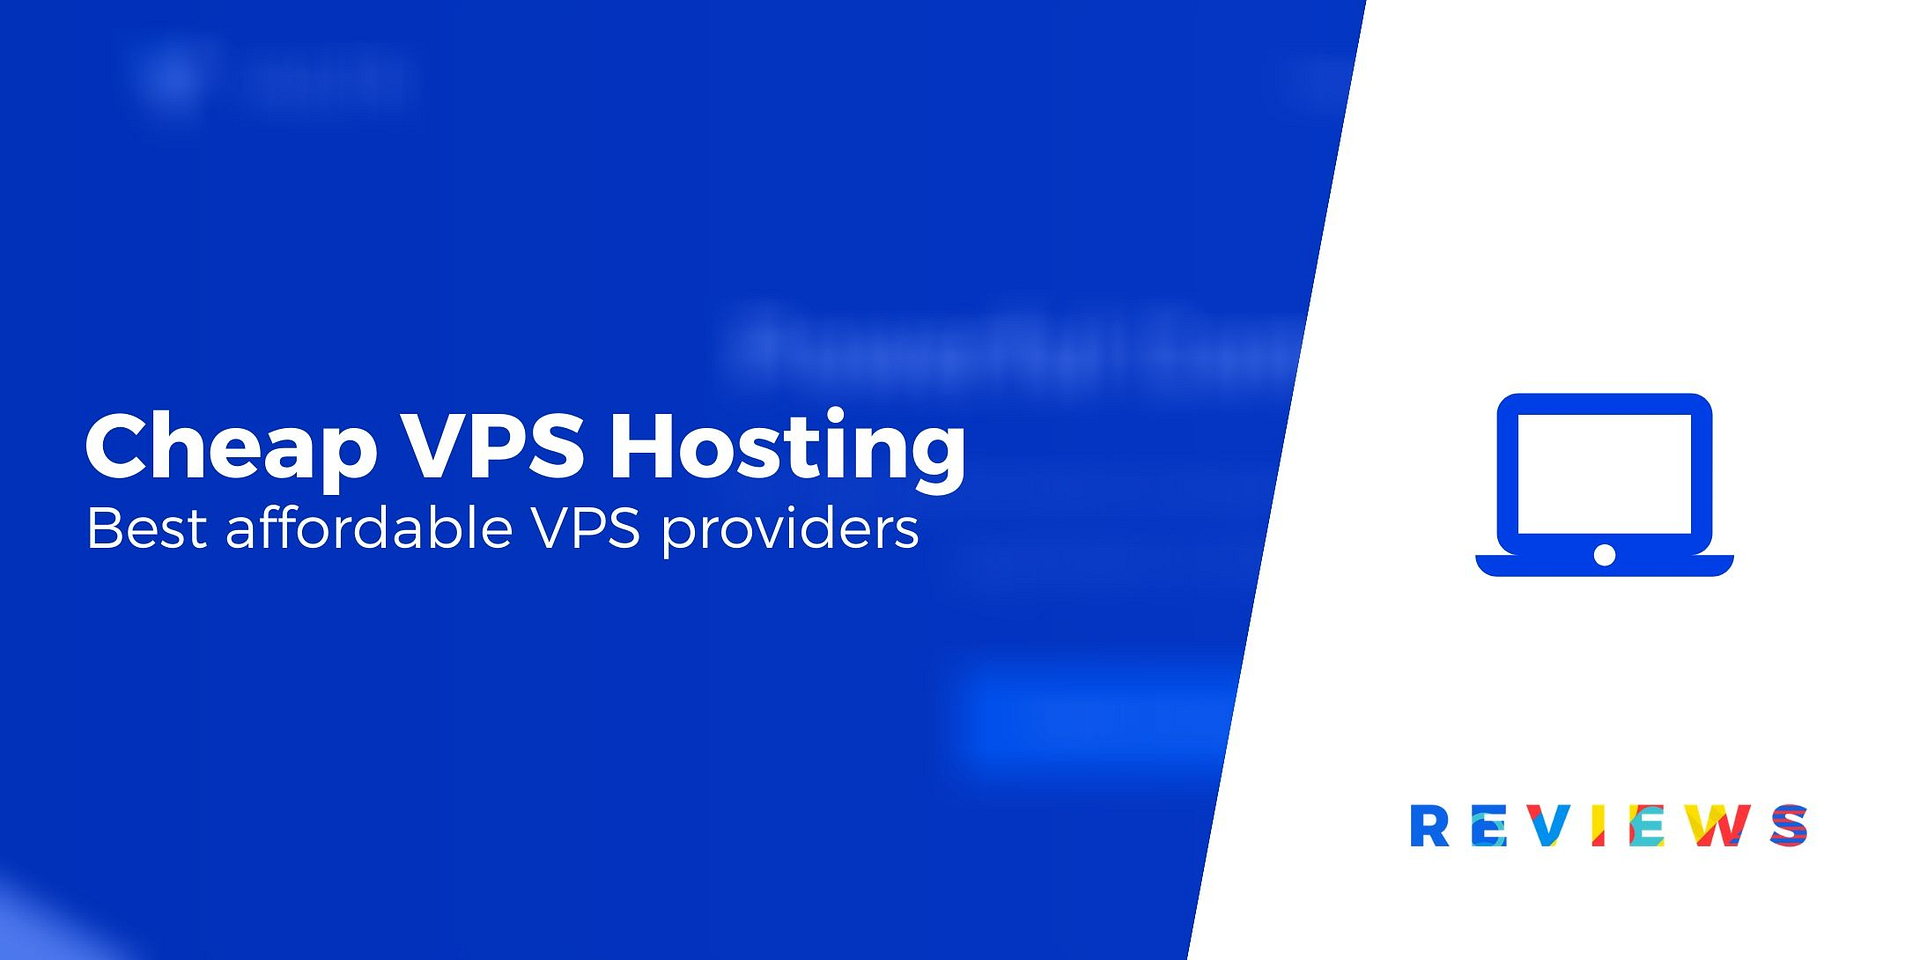 5 Best Cheap VPS Hosting Services Compared (2022 Deals)